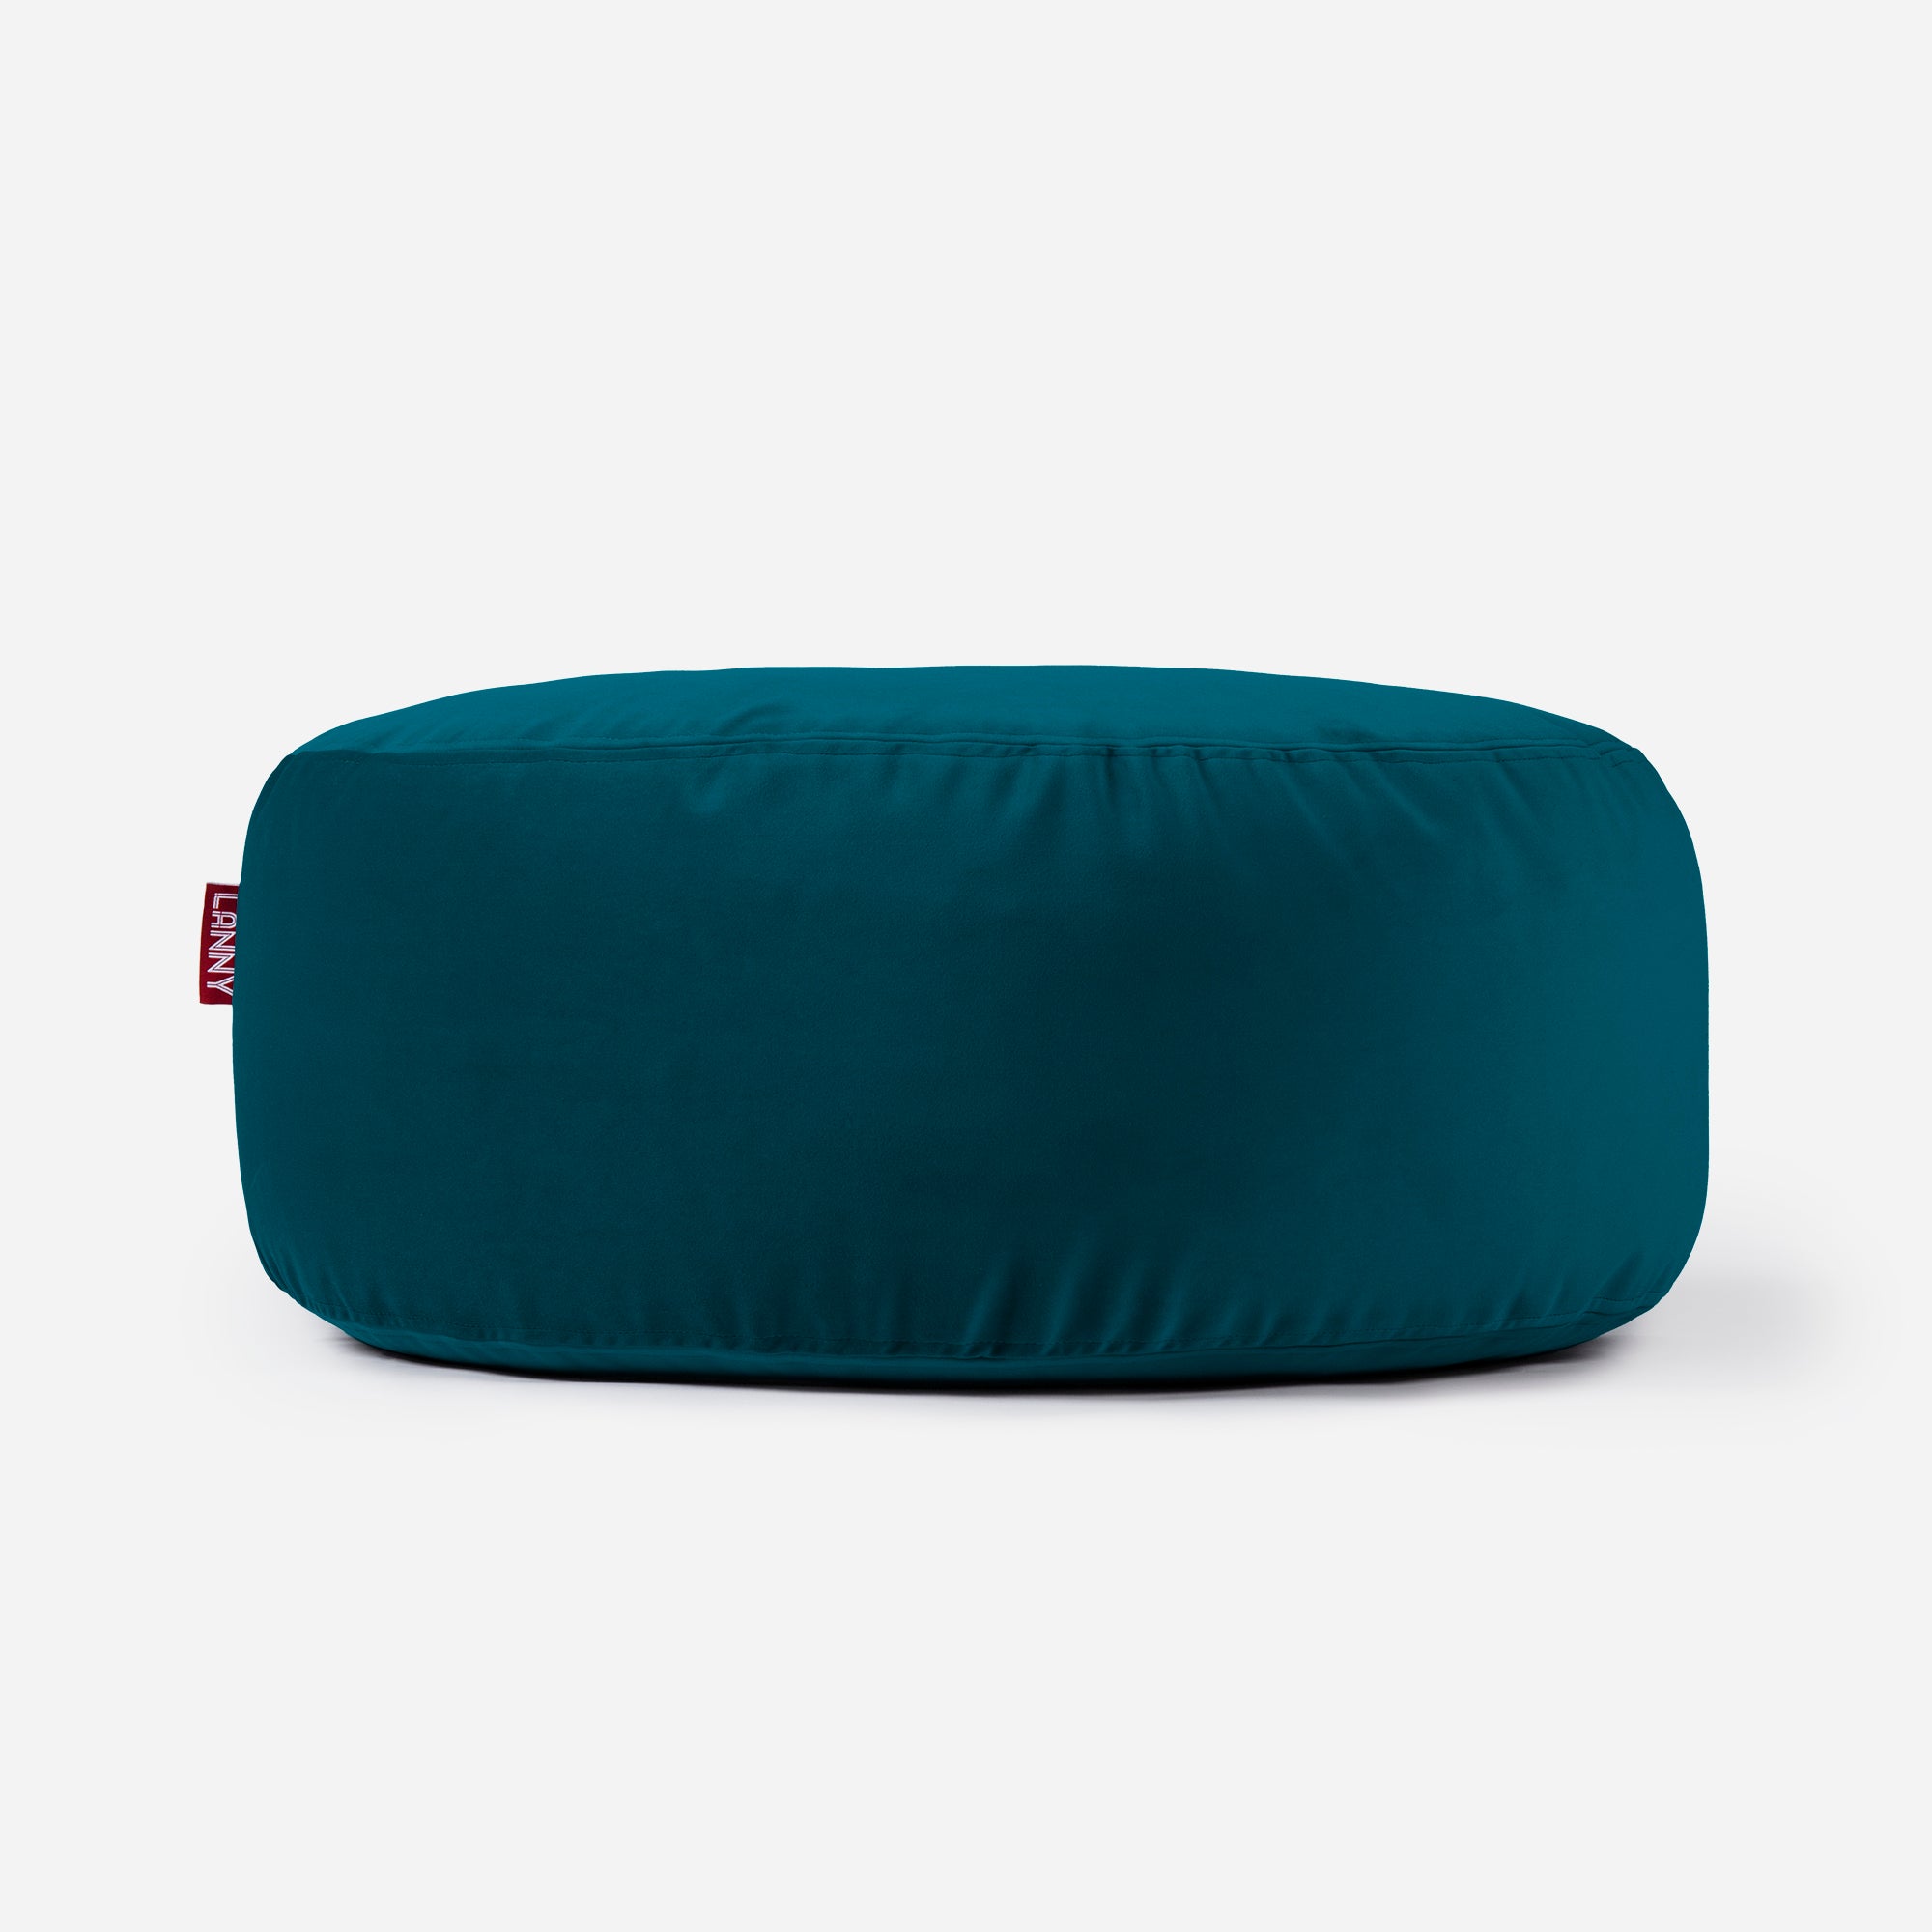 Lanny pouf made from velvet fabric in aqua color